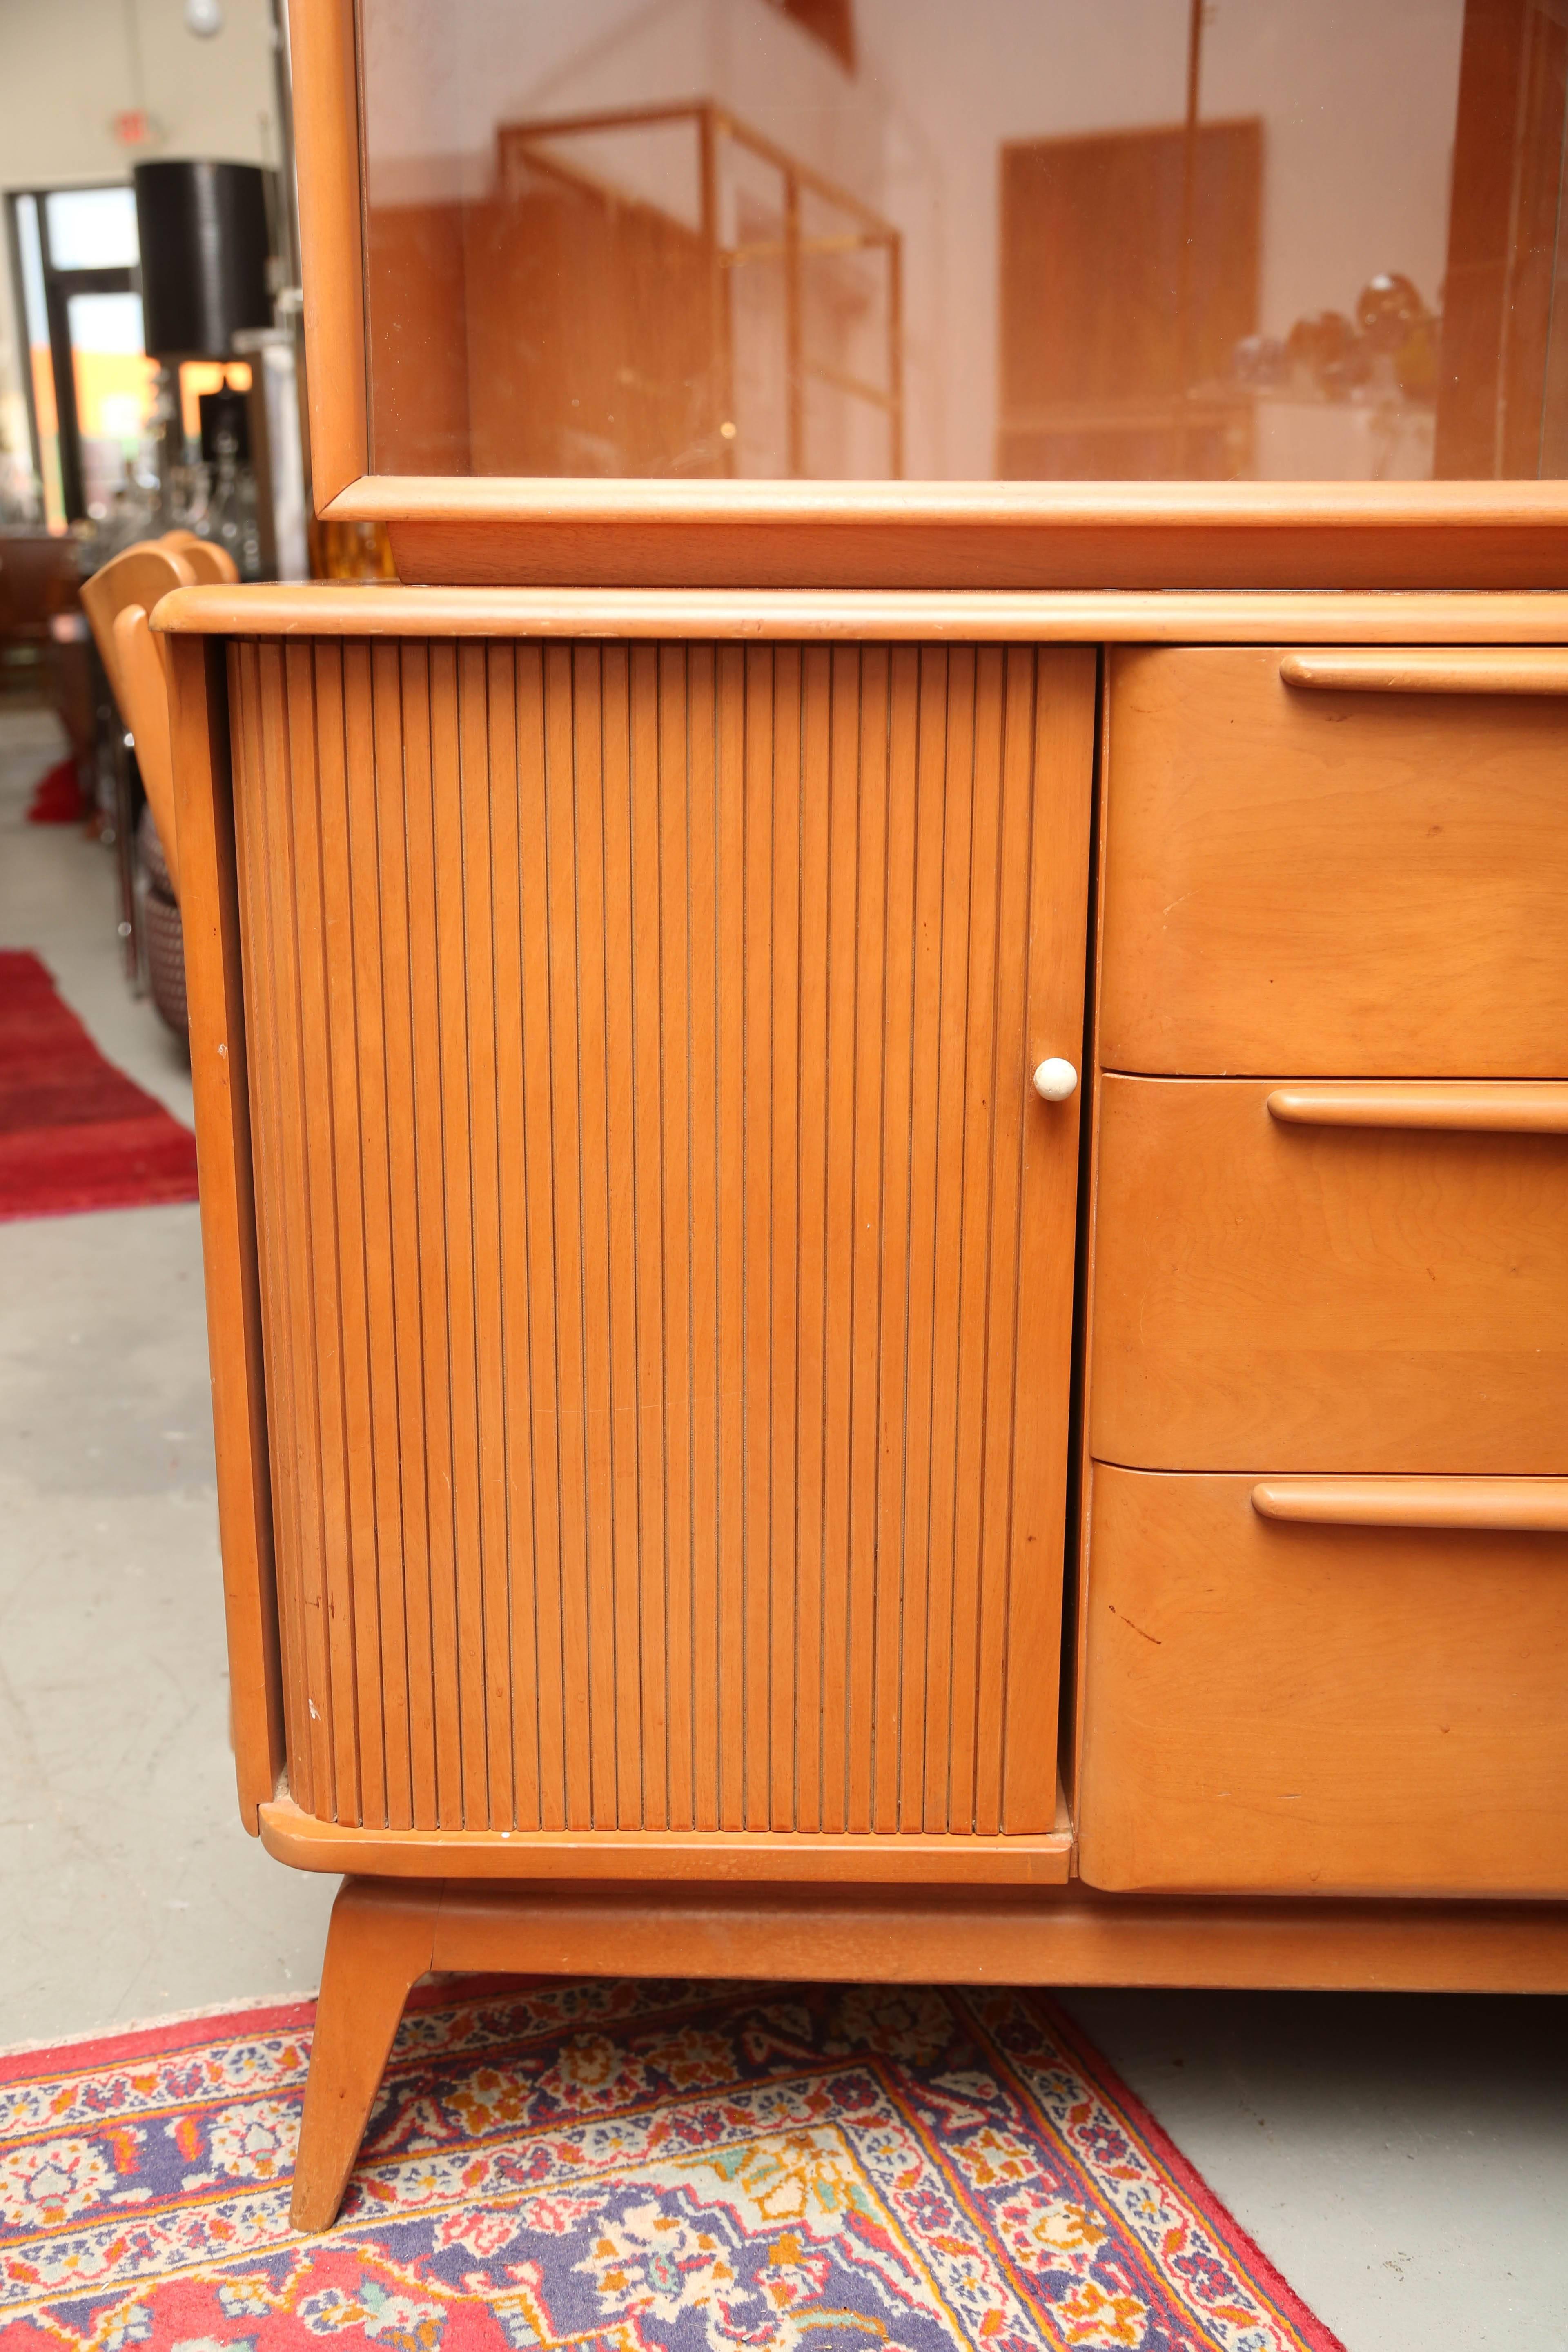 Two-piece Heywood Wakefield cabinet that come a part and be used as a credenza or can be used together as a china hutch. A very versatile piece.